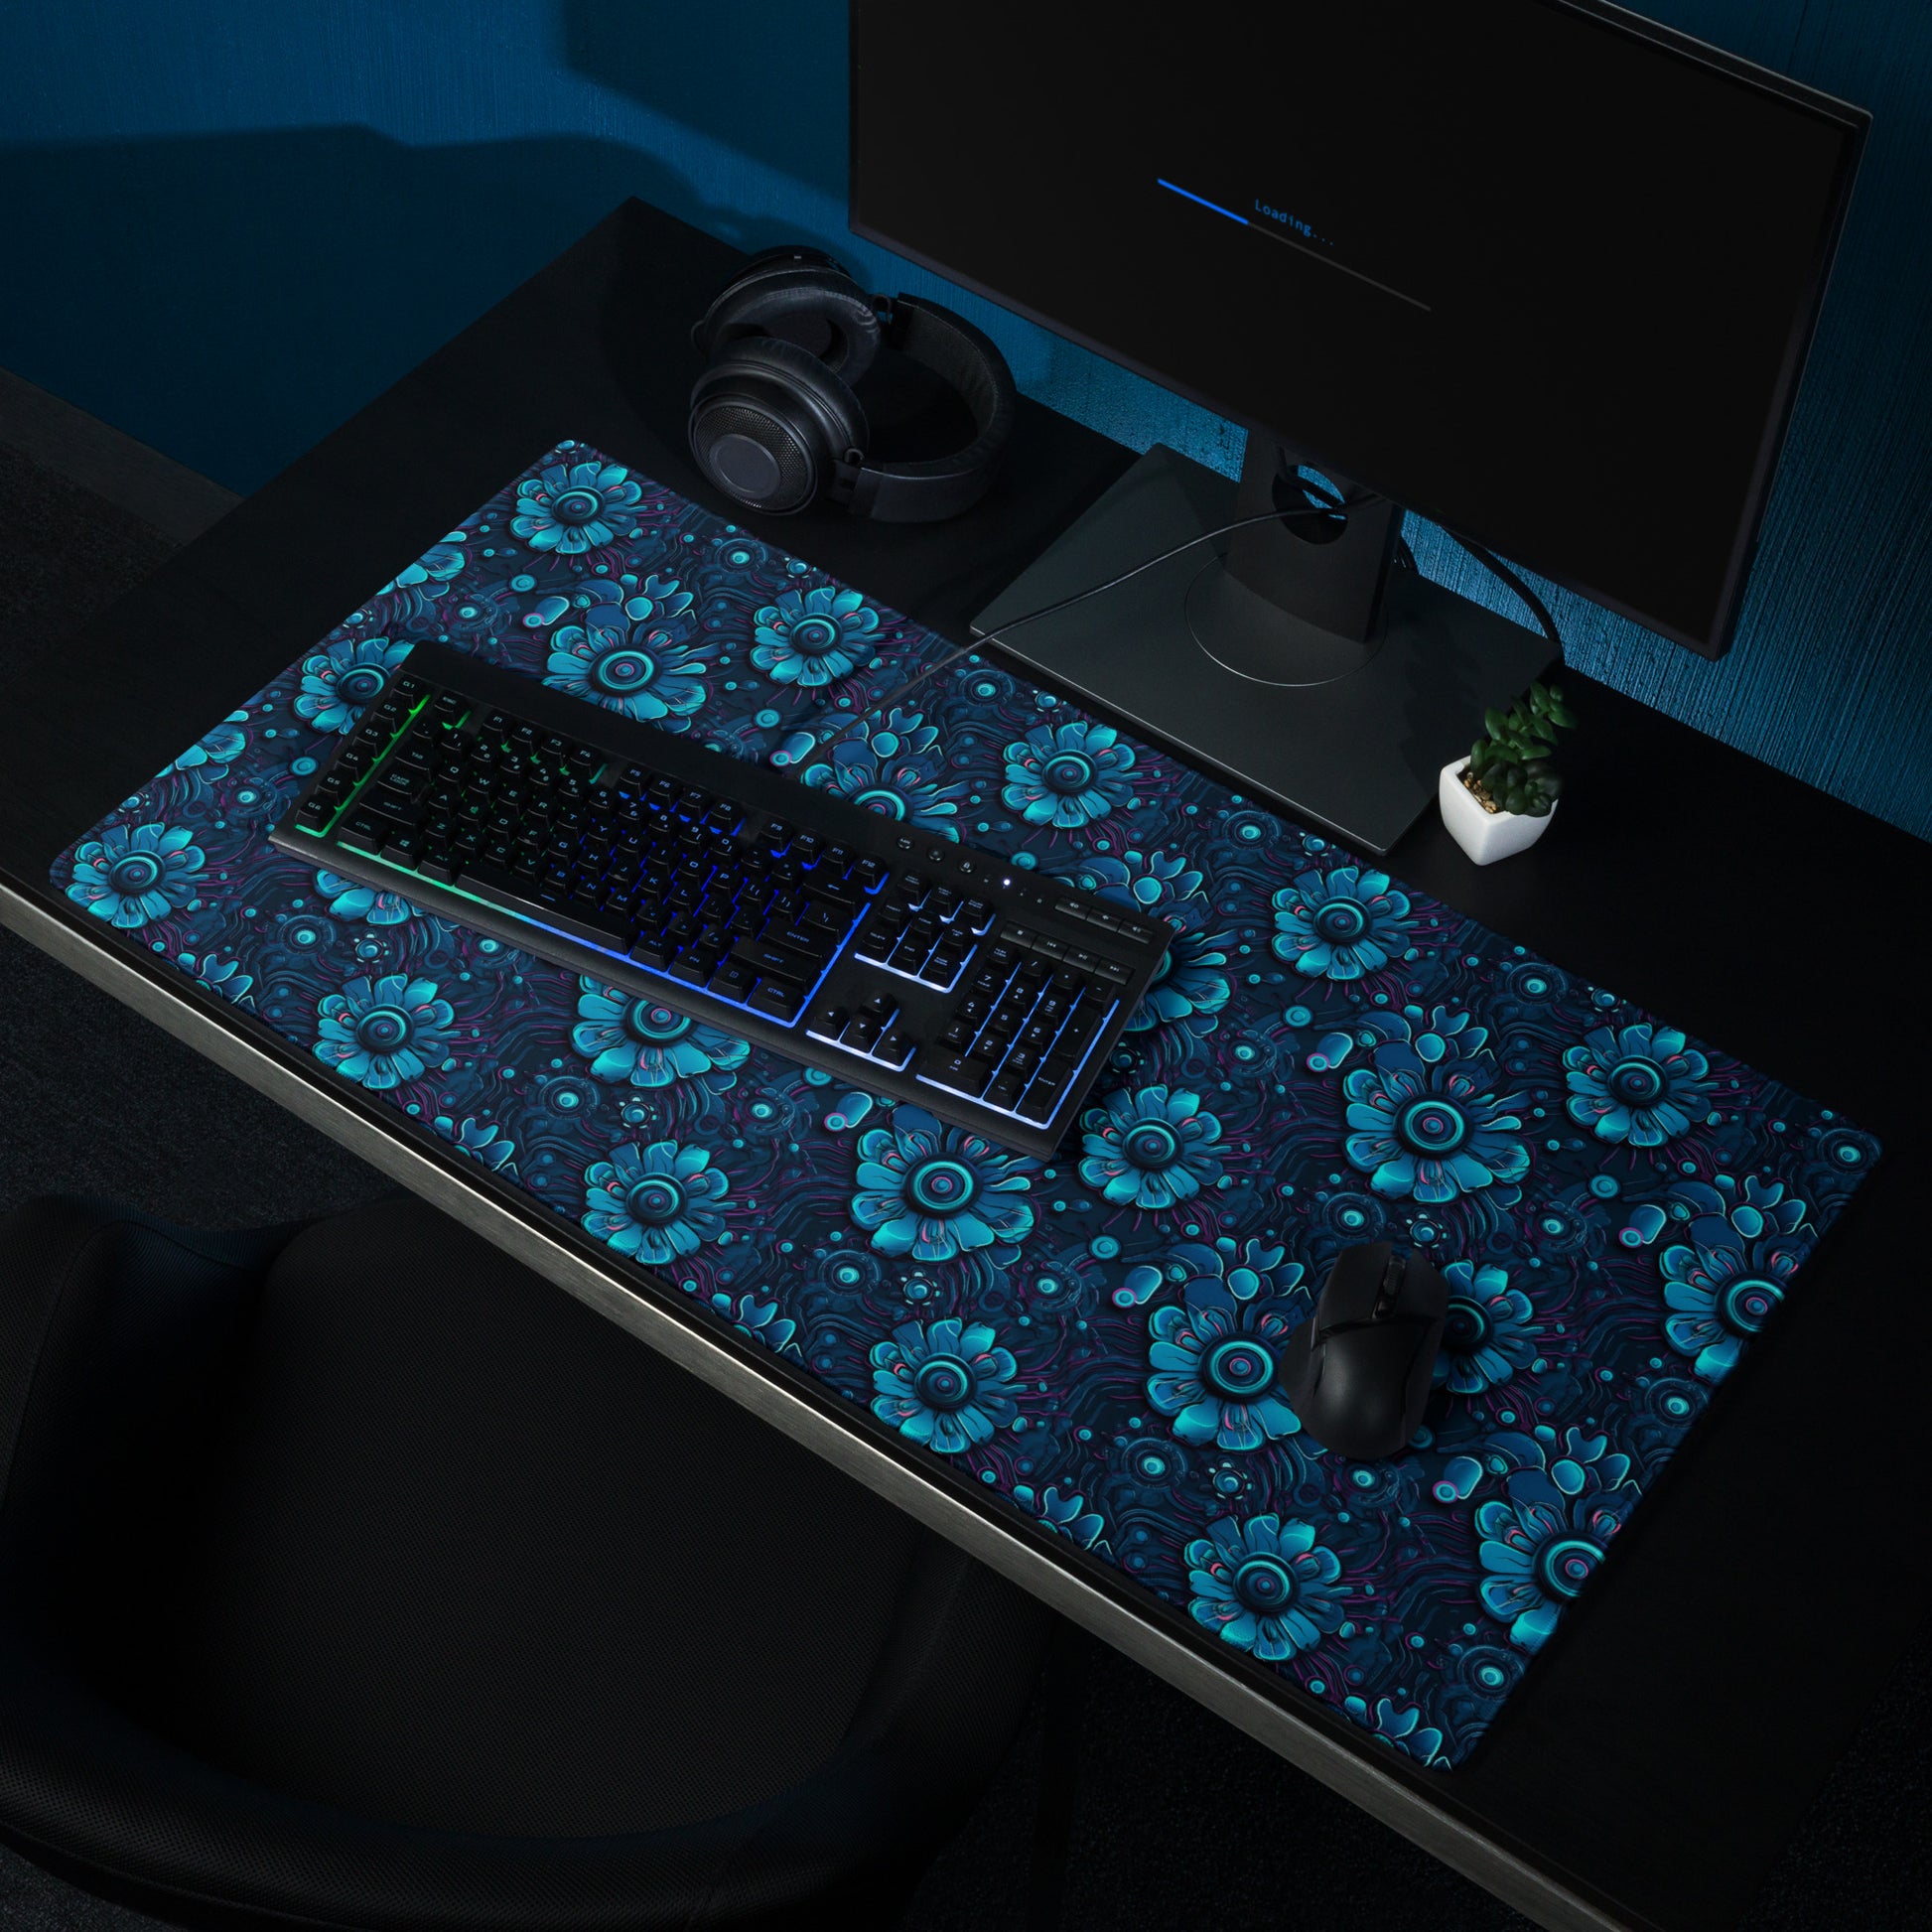 A 36" x 18" desk pad with a blue robotic floral pattern sitting on a desk.